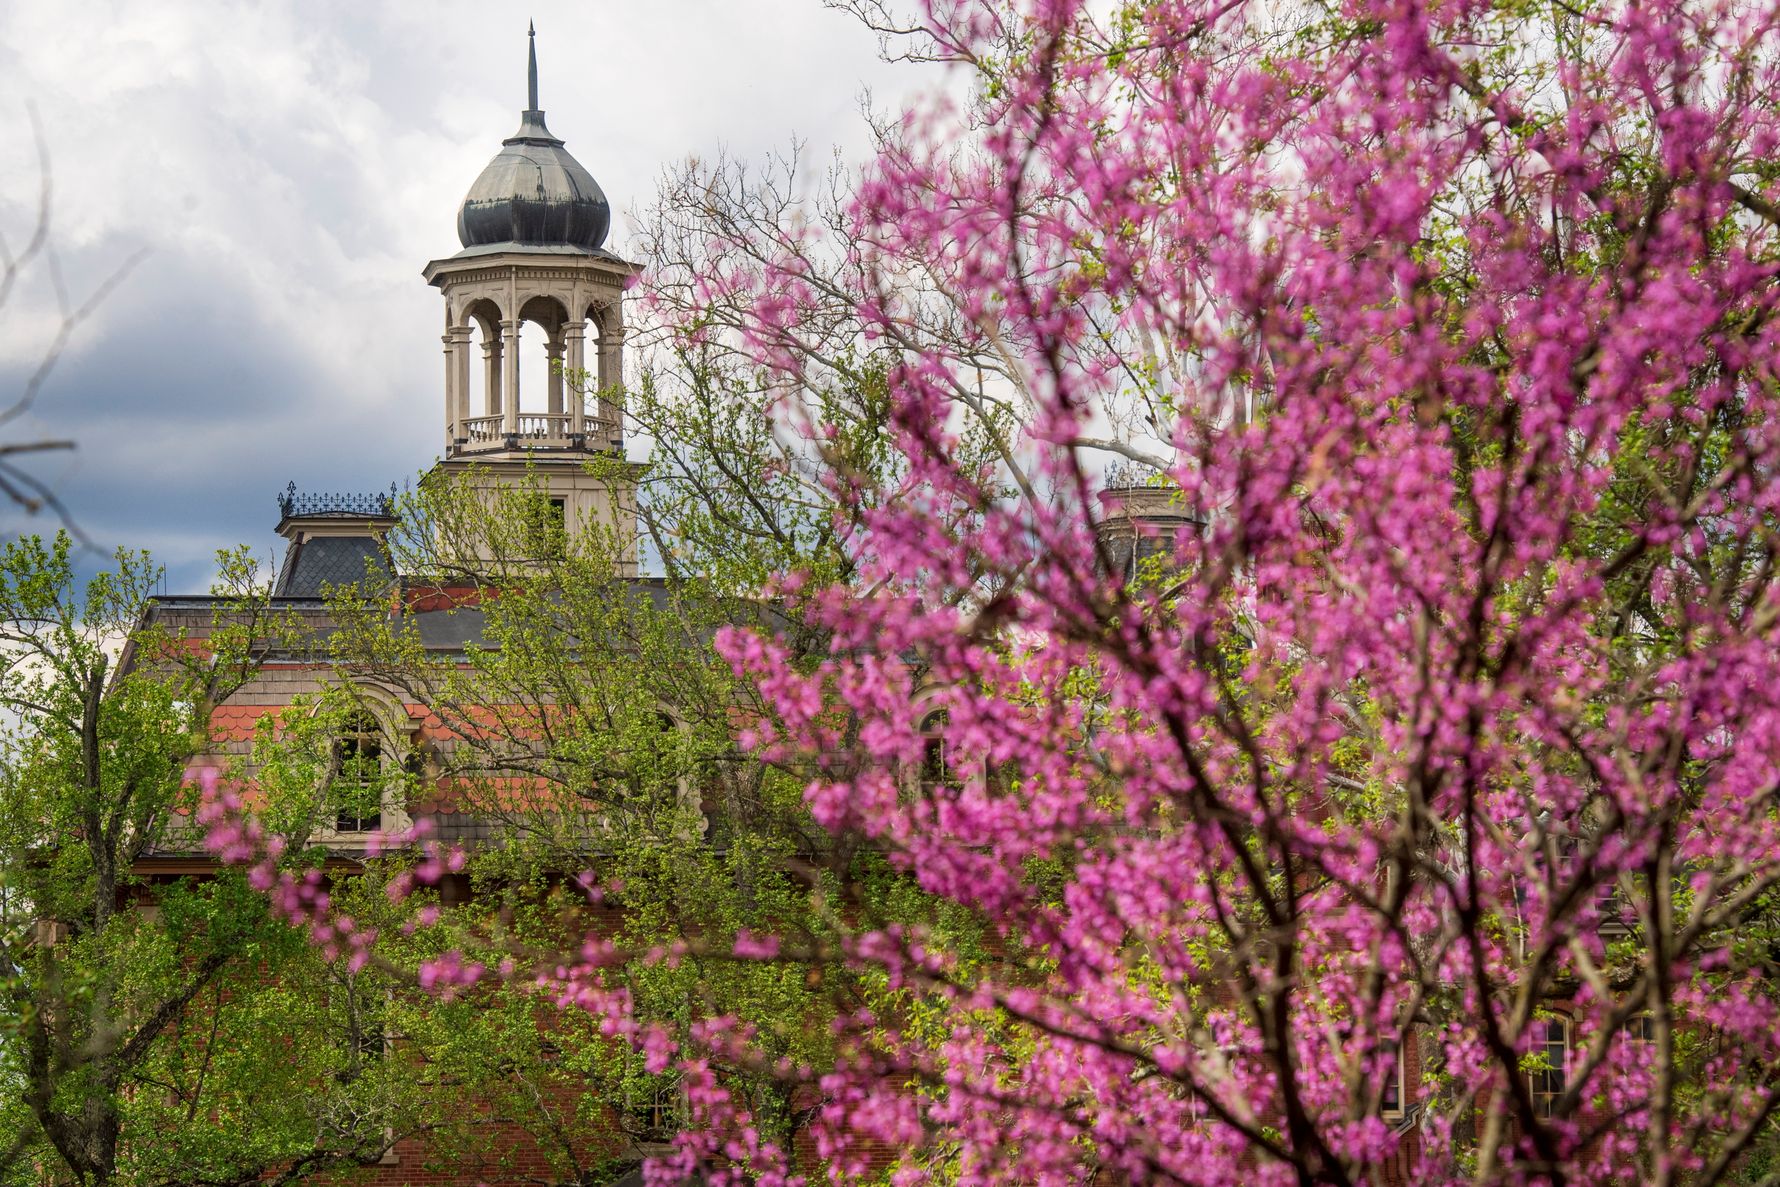 Flowering tree with Martin Hall tower in background.